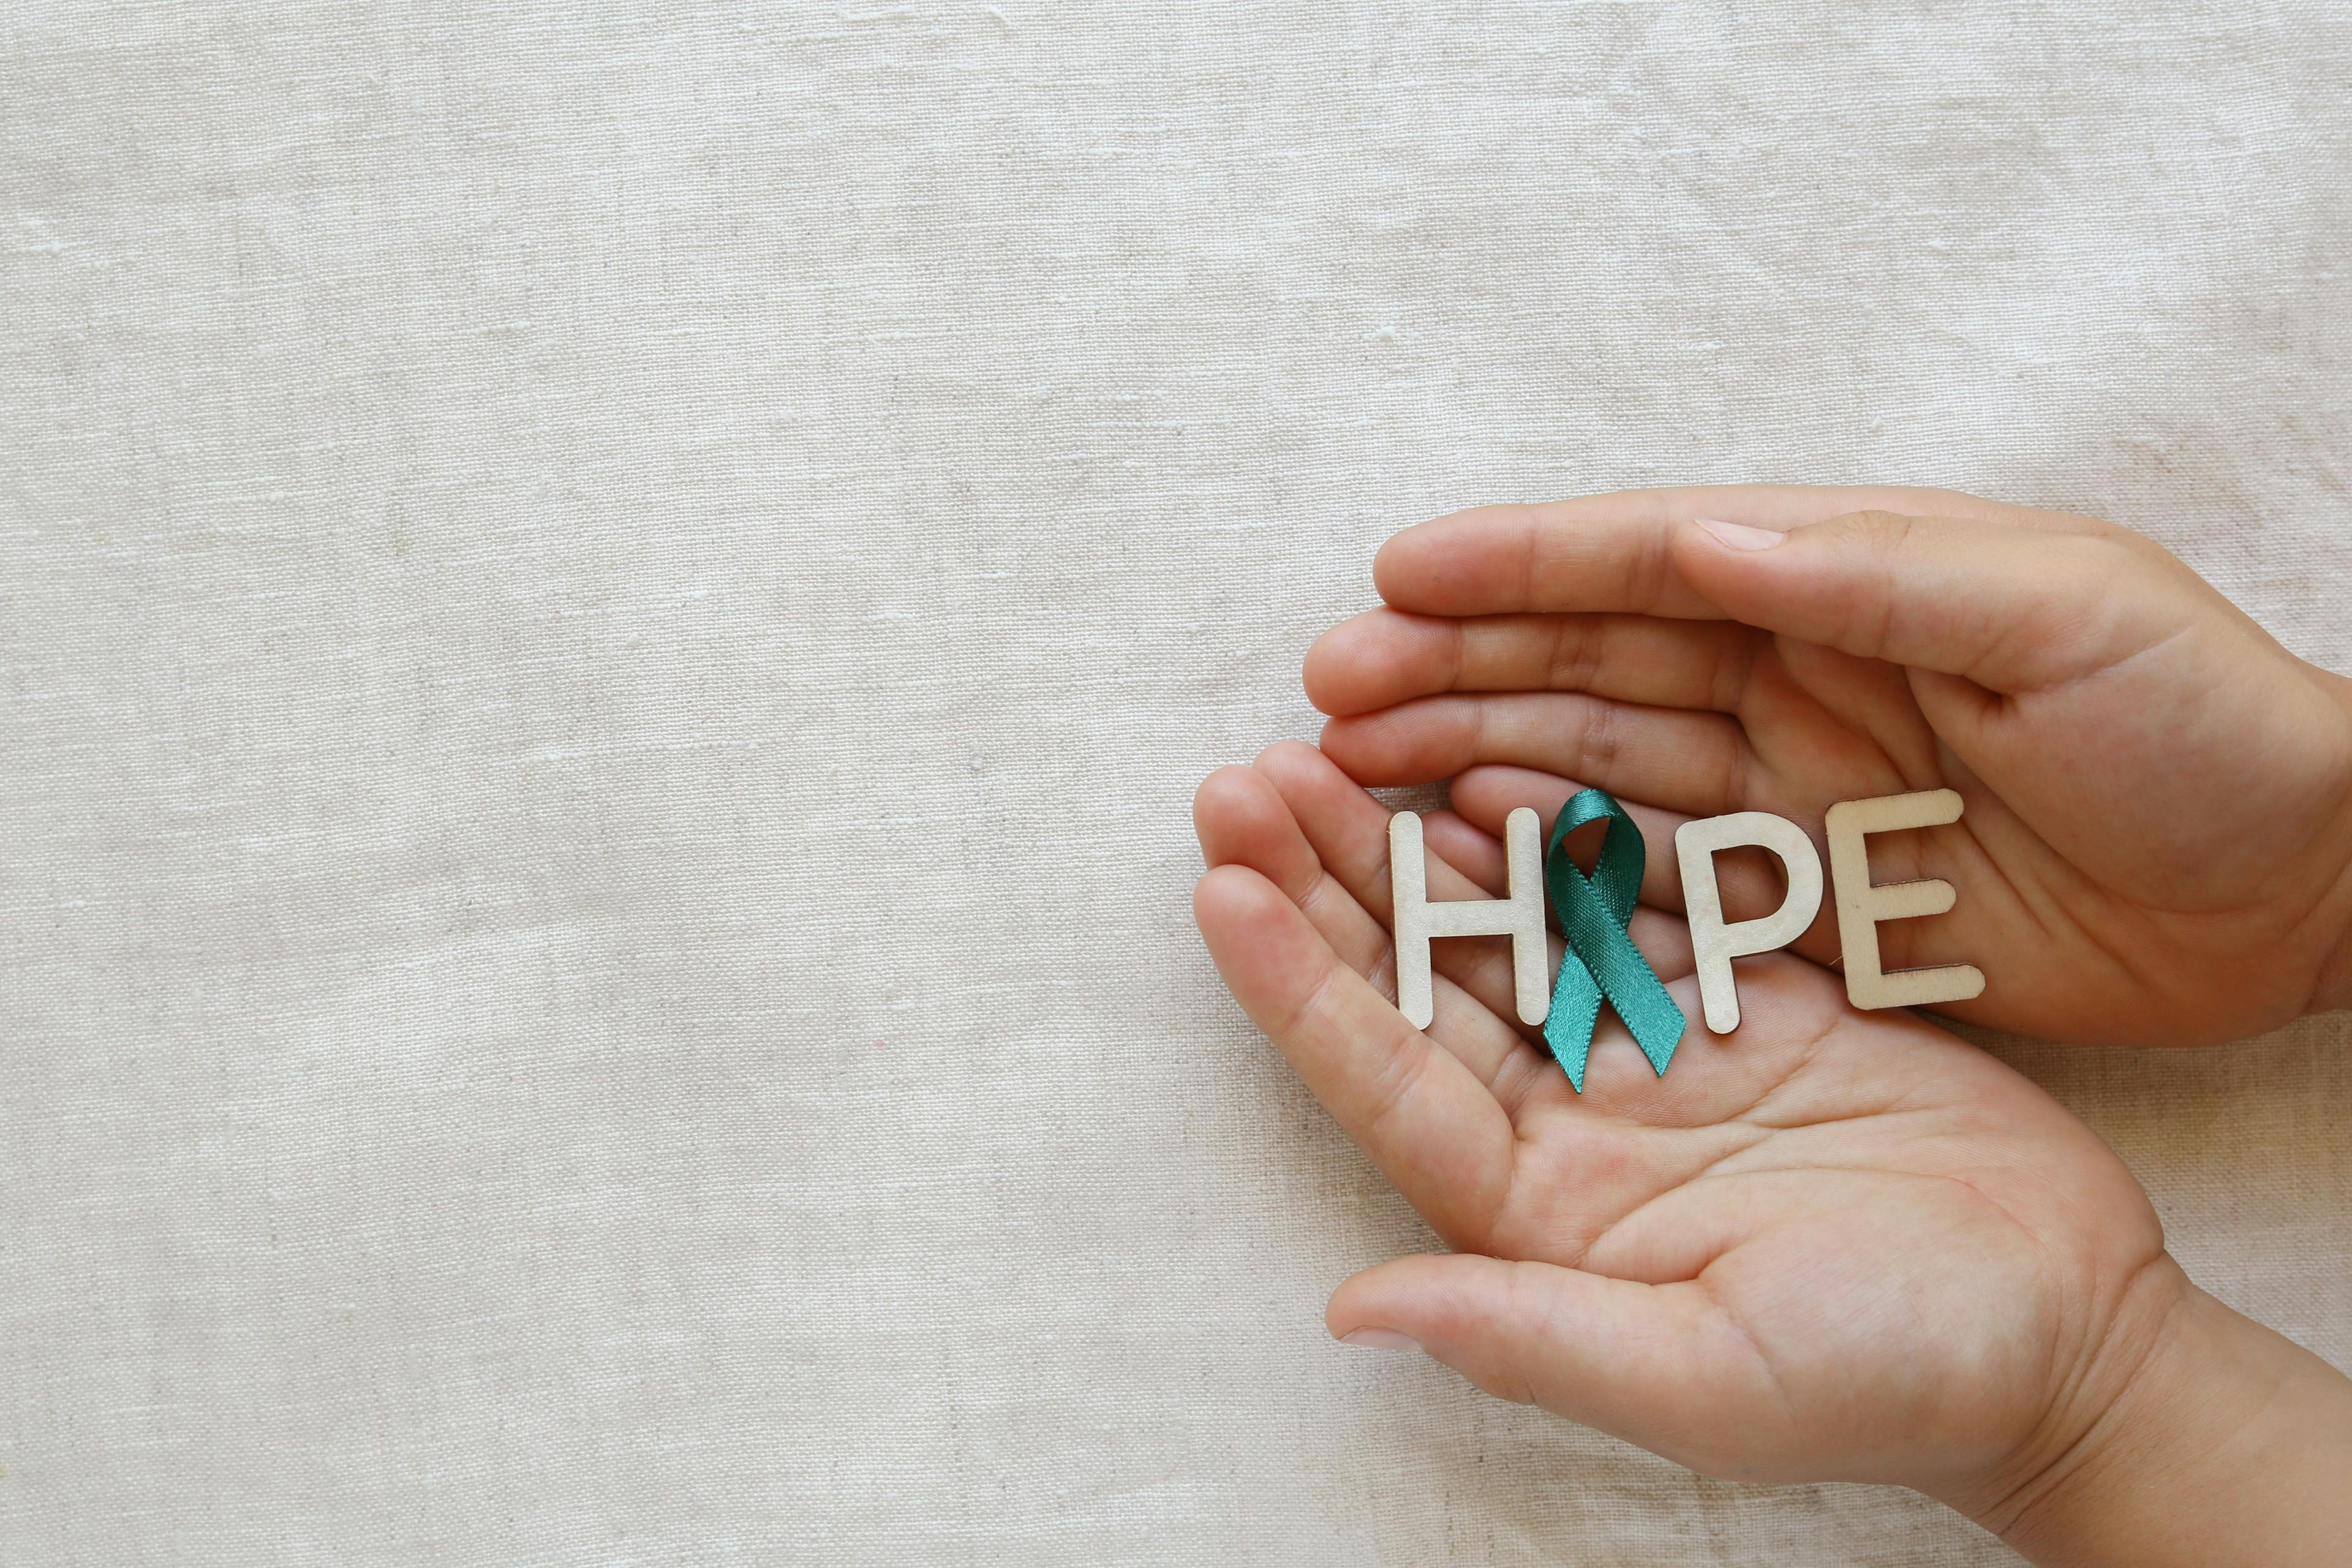 Image of the ovarian cancer ribbon.